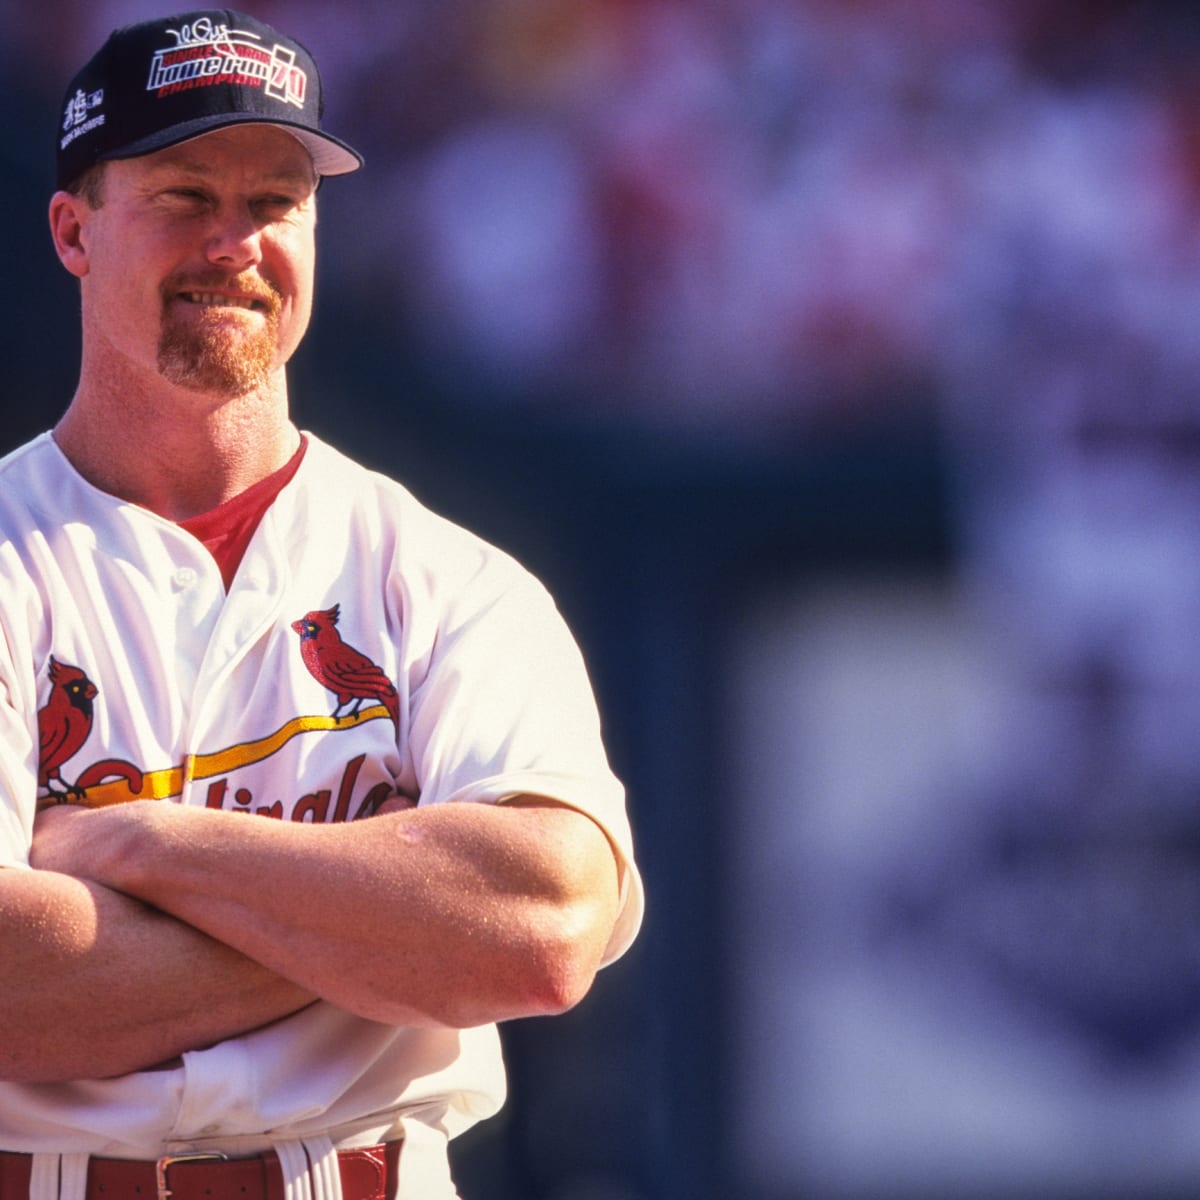 Mason McGwire, Son of Mark McGwire, Drafted by Cubs - Sports Illustrated